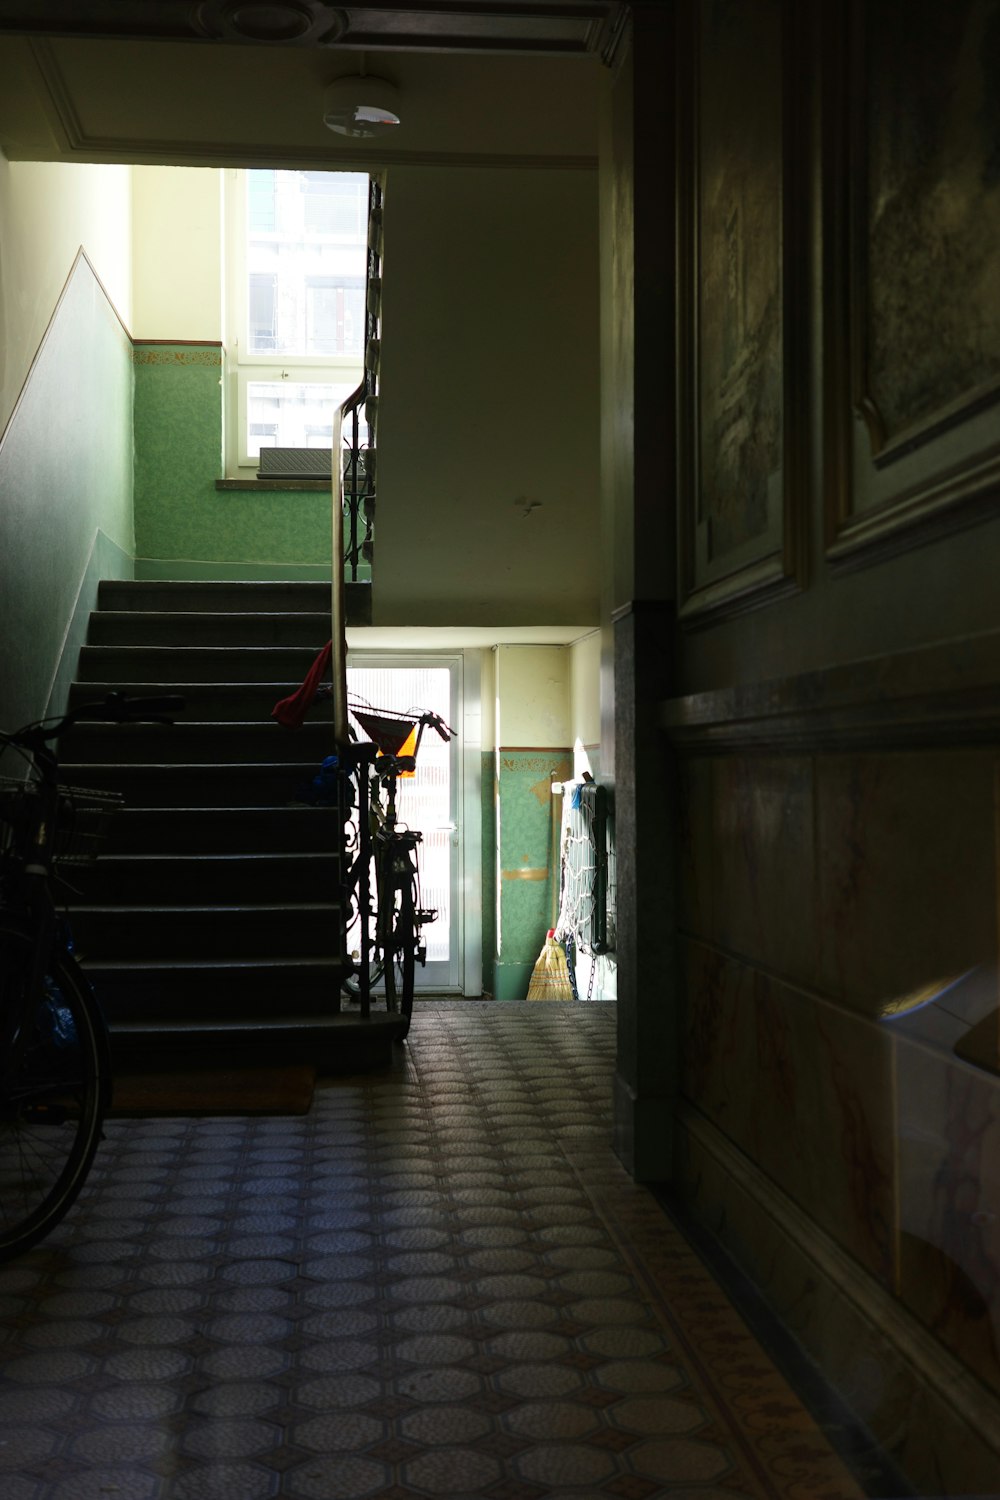 a bike is parked in a hallway next to a staircase